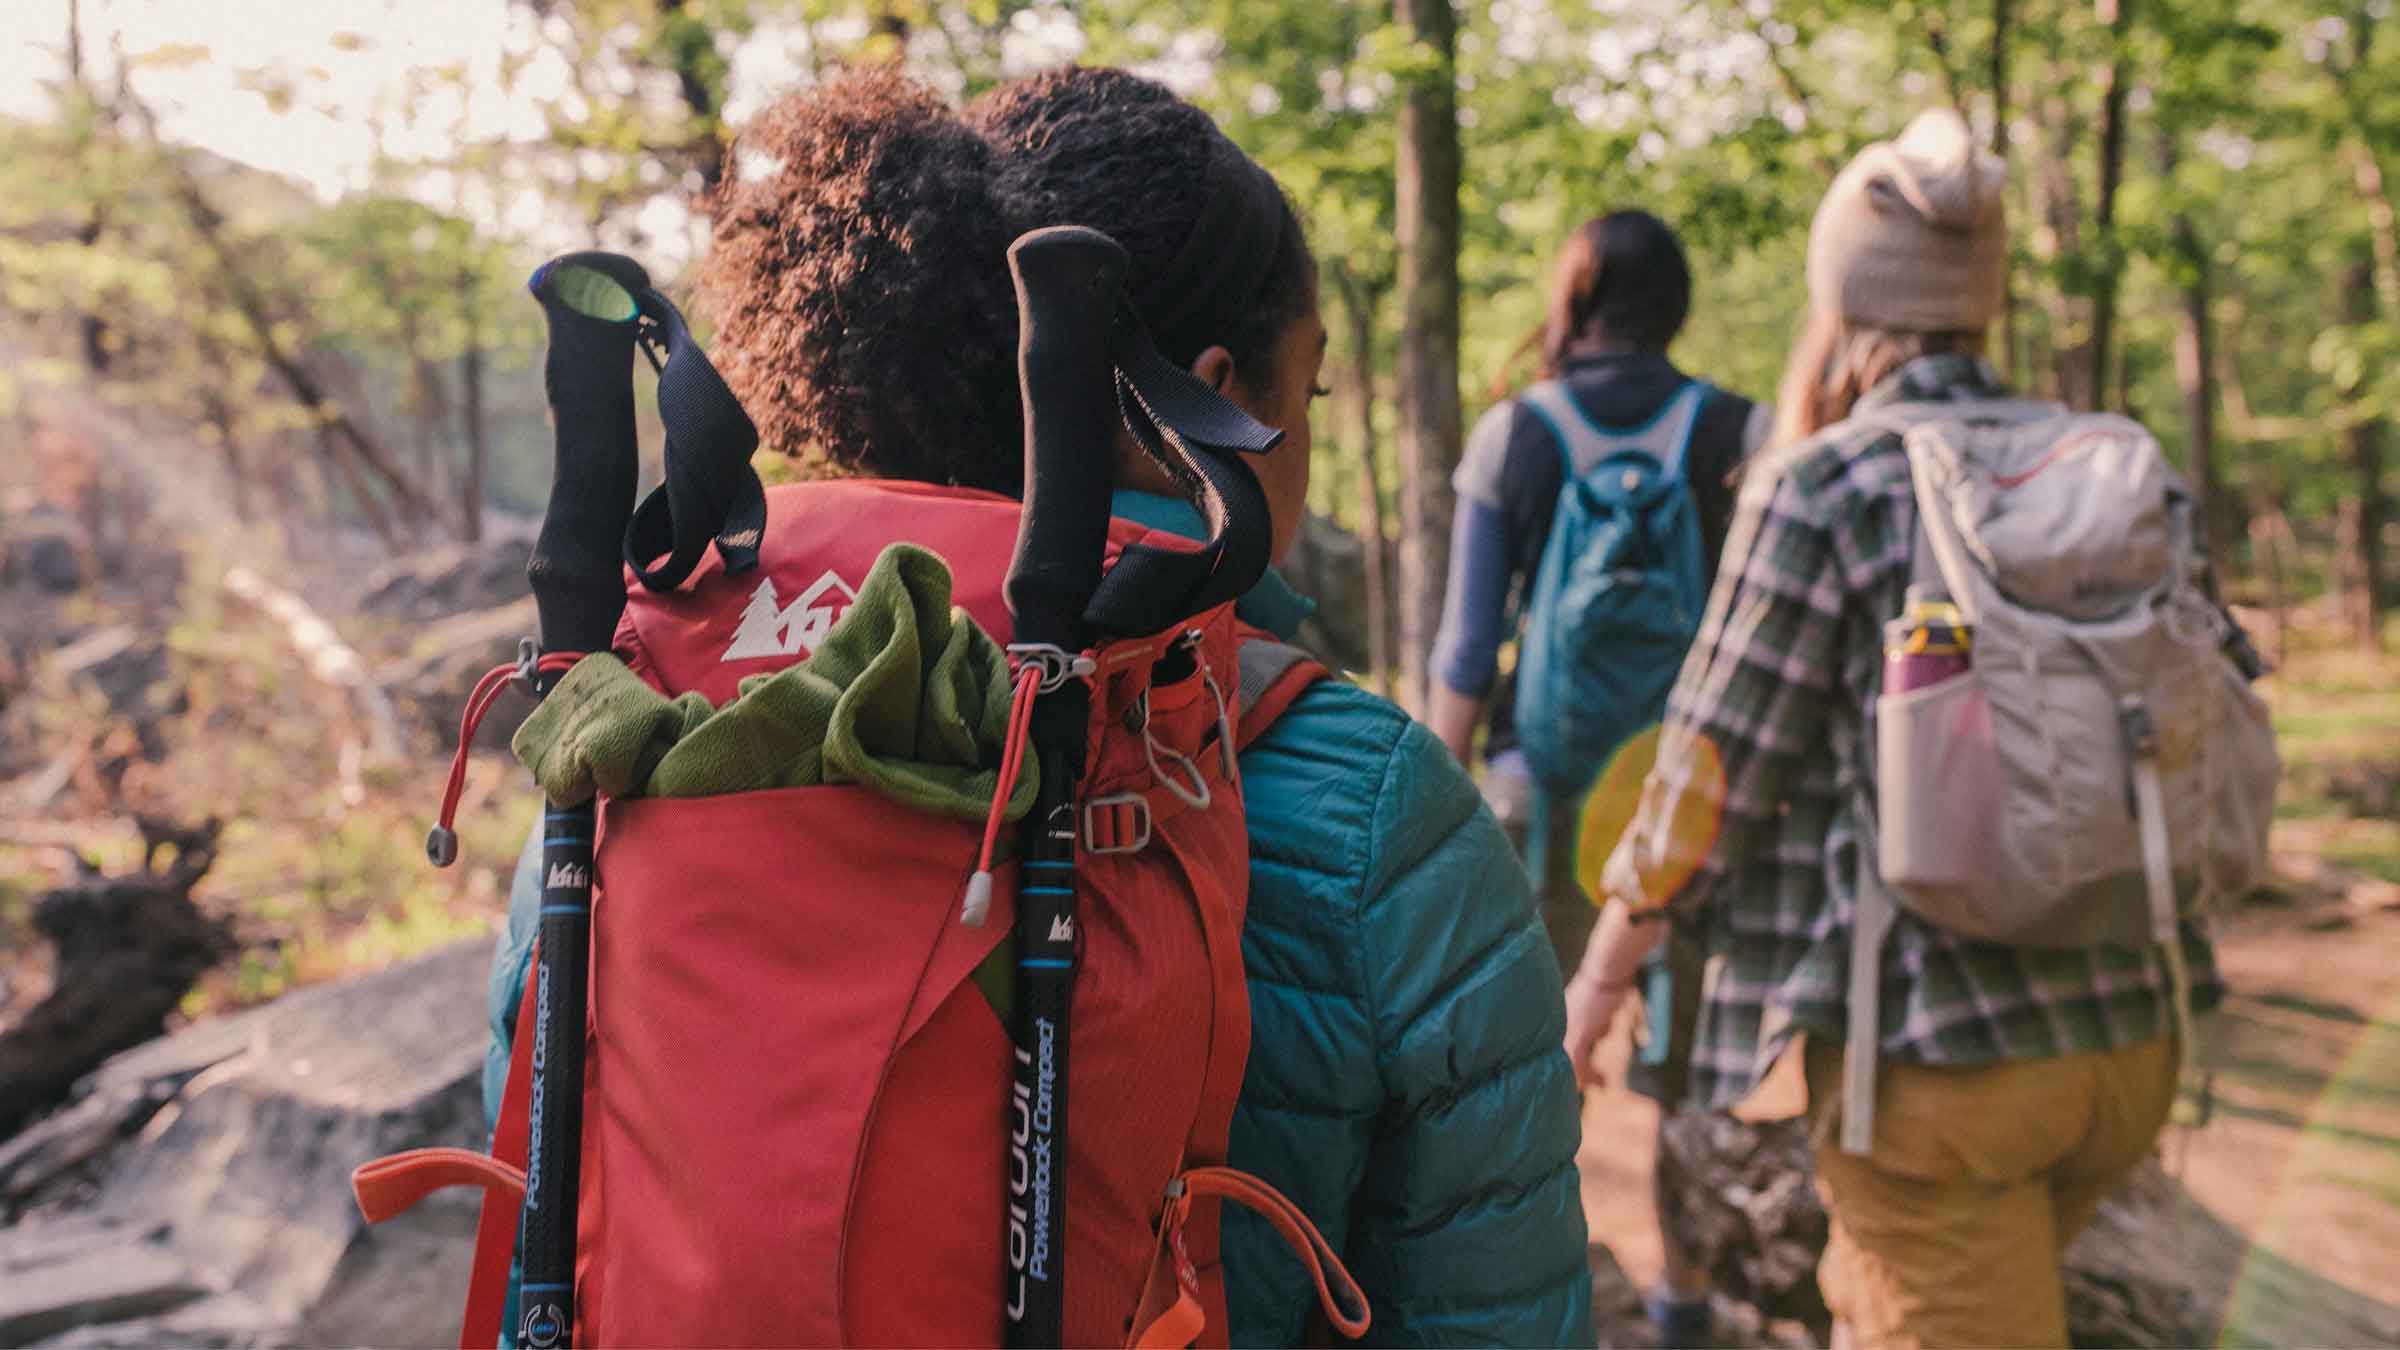 Women's Hiking Basics with REI Mountains To Sound Greenway Trust